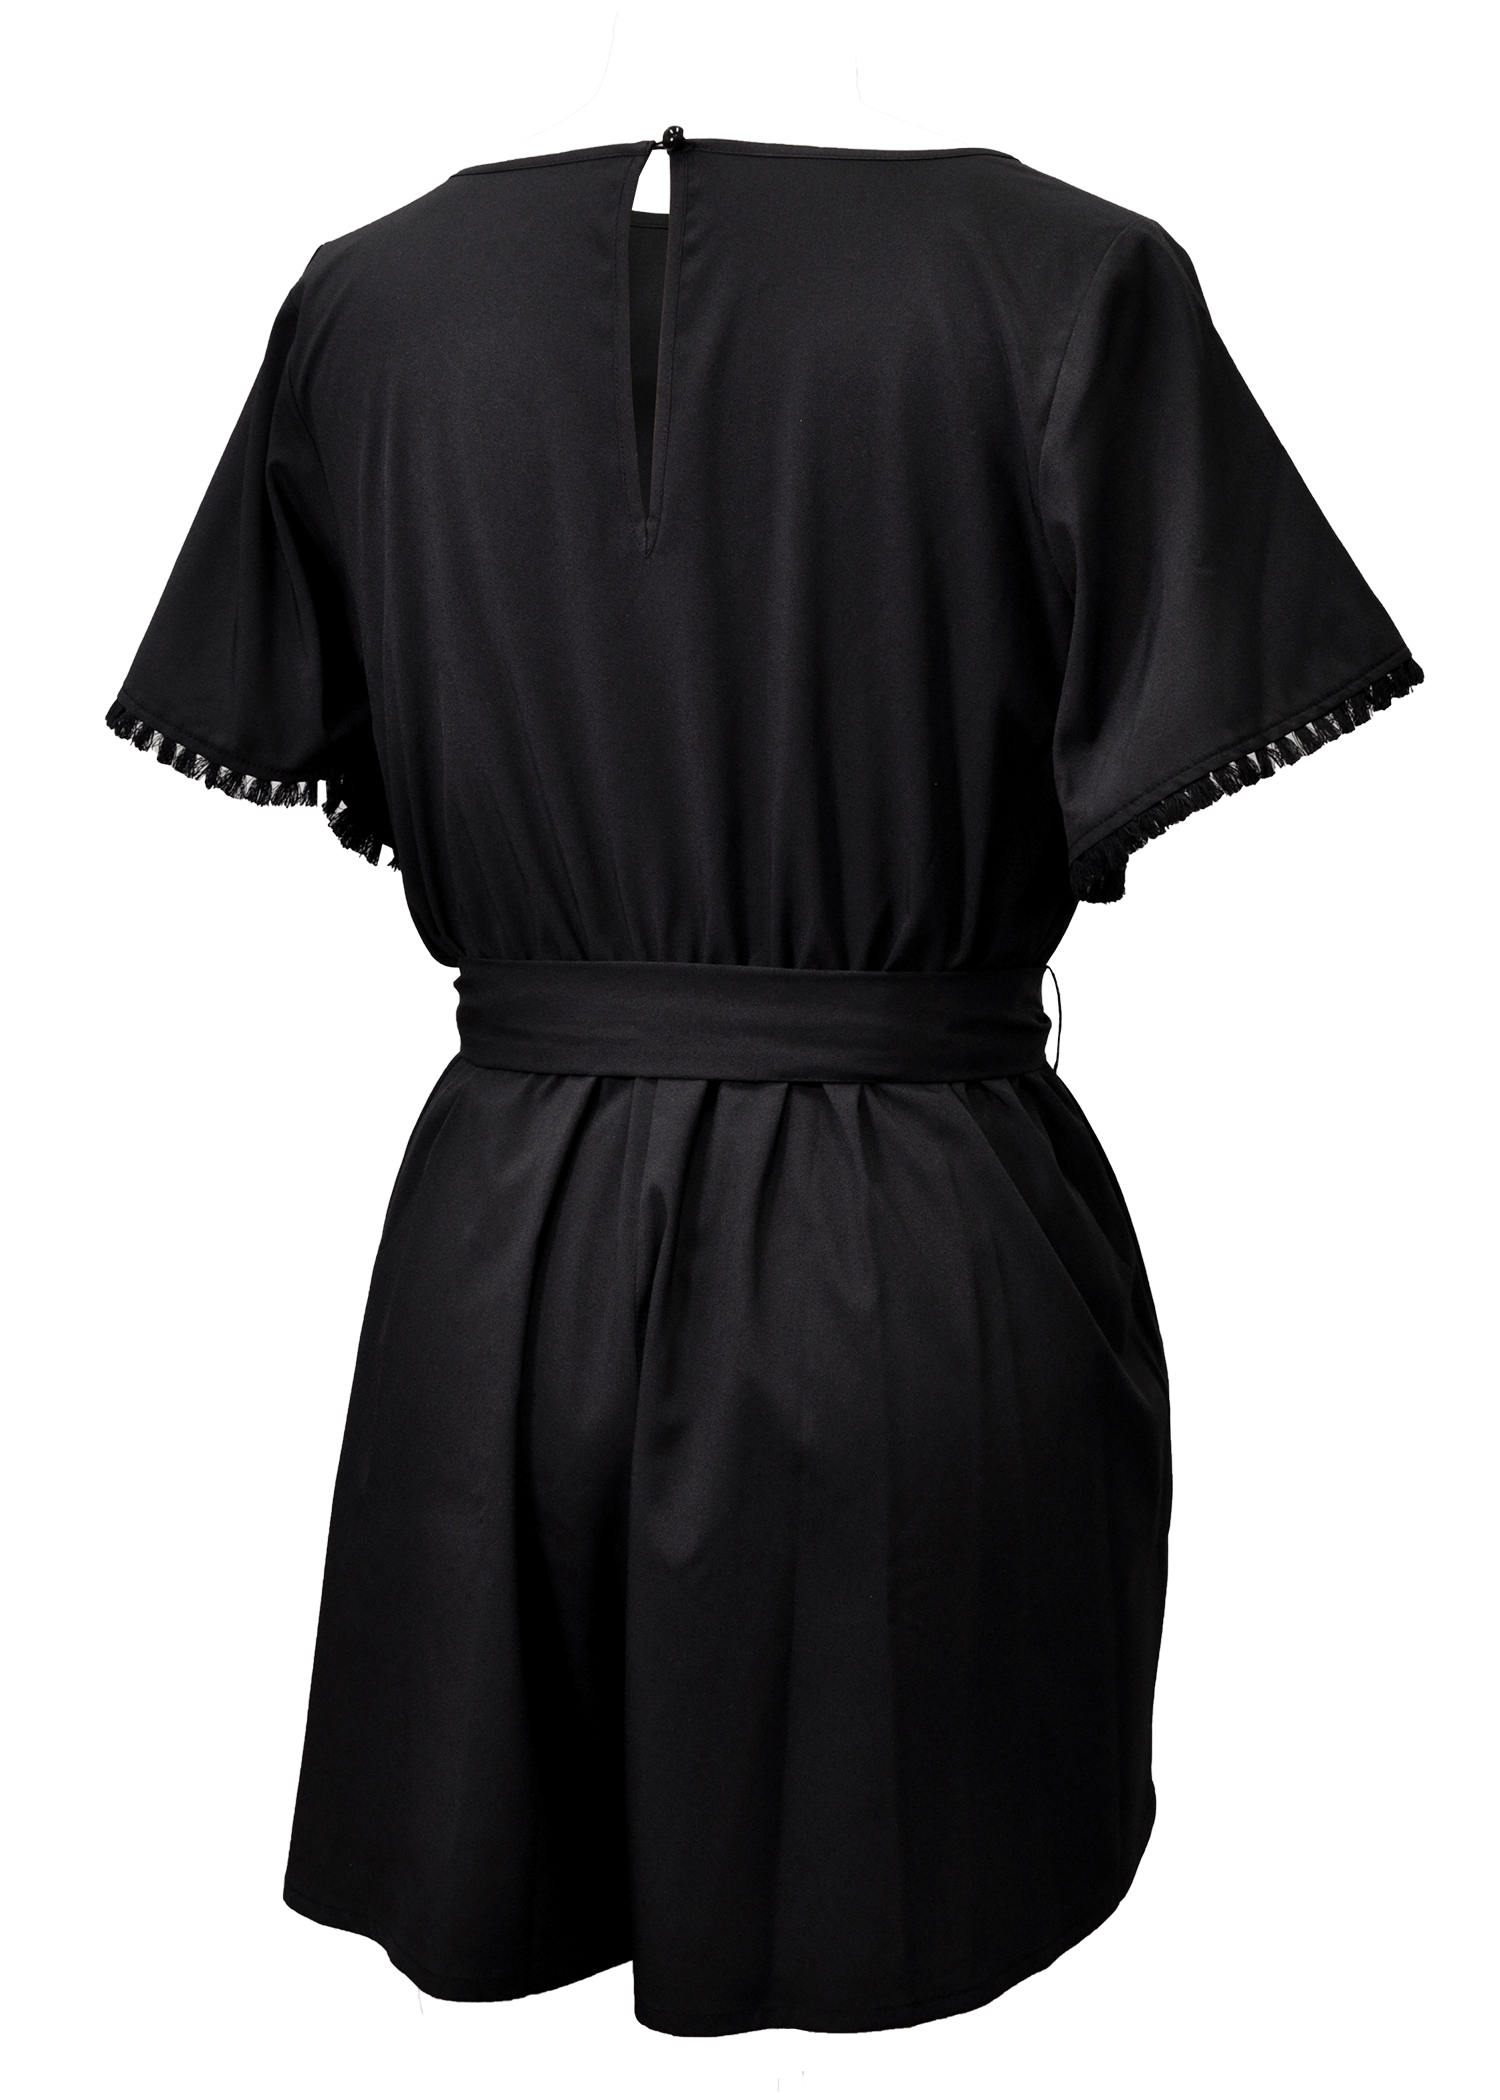 Young USA Casual Spring Romper with Front Tie in Black. Back View.